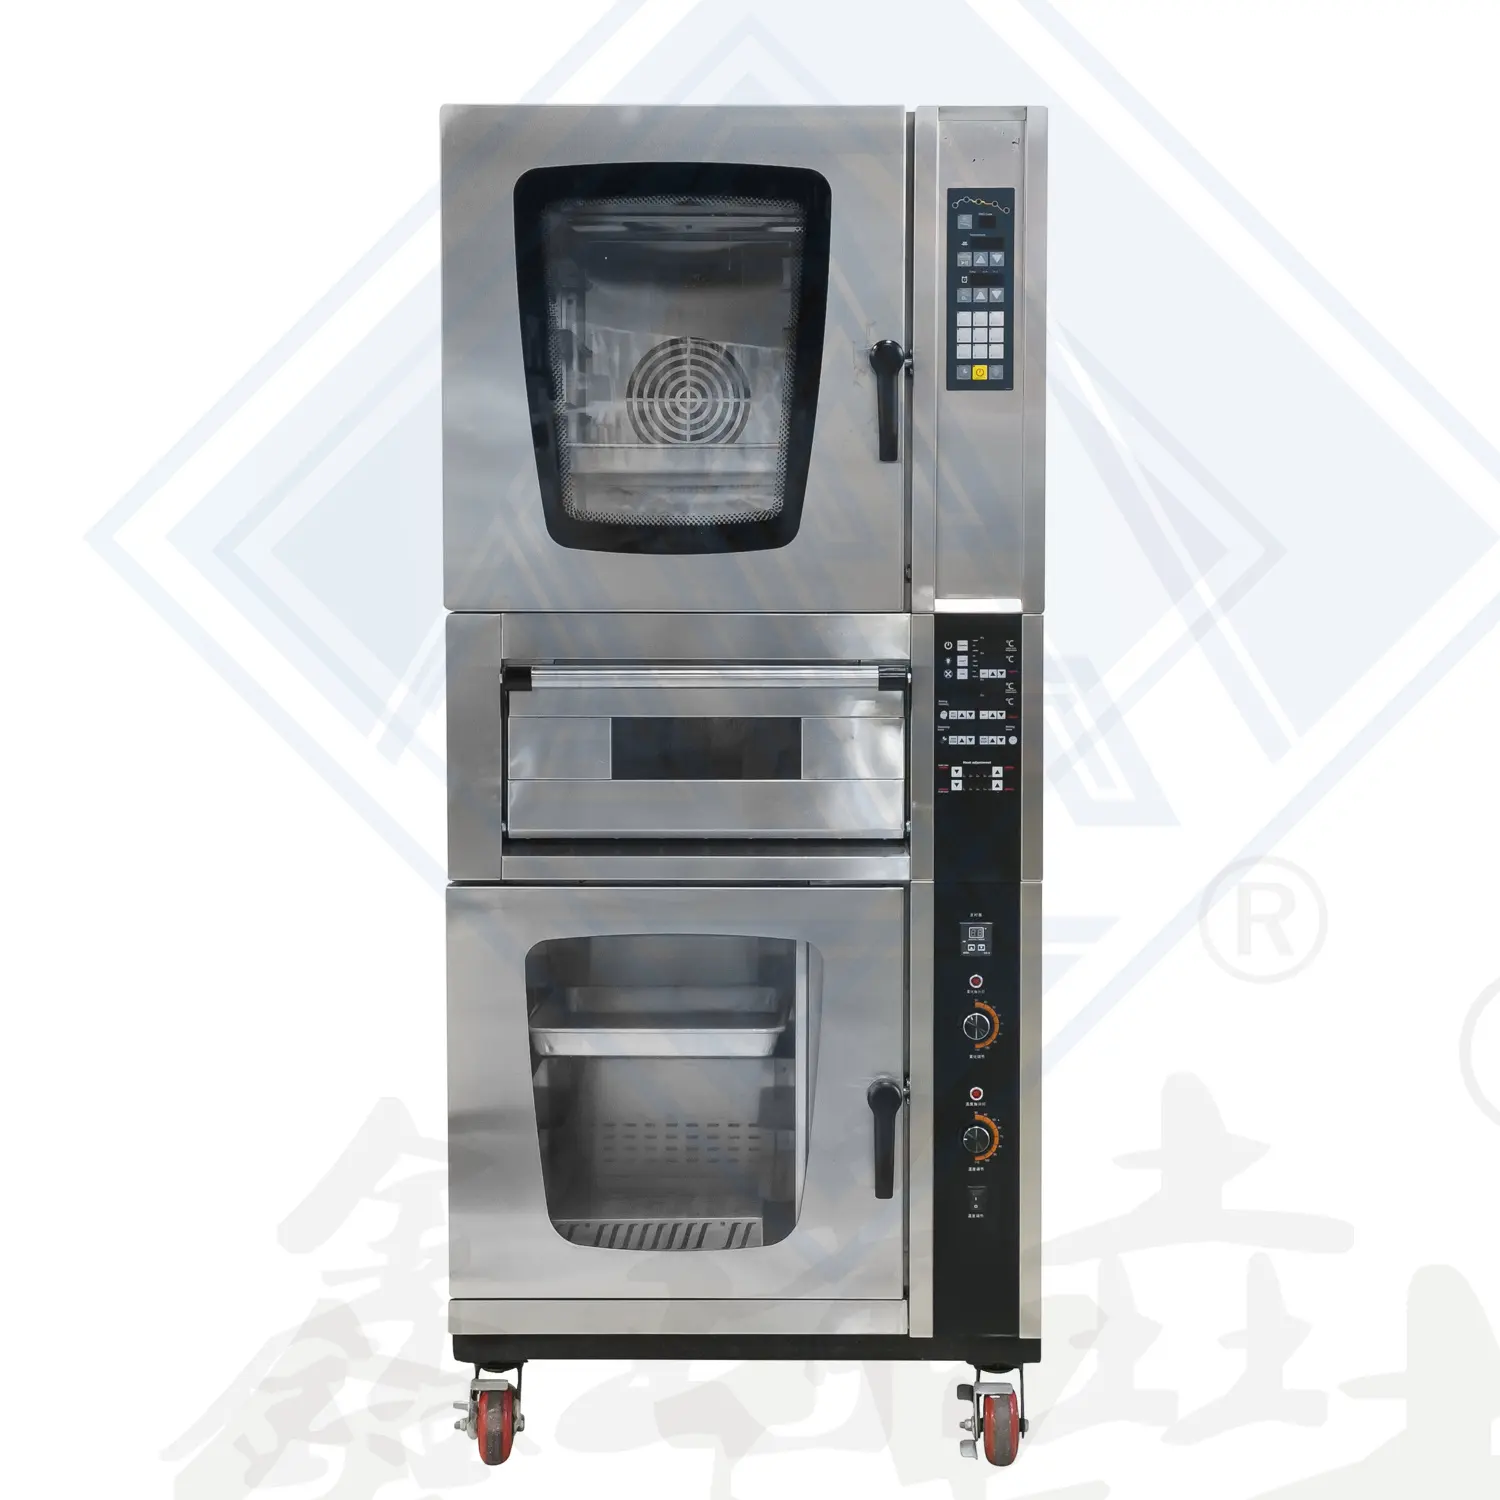 Used Rotary Electric Oven For Sale Rotary Oven Baking Bread Making Machine